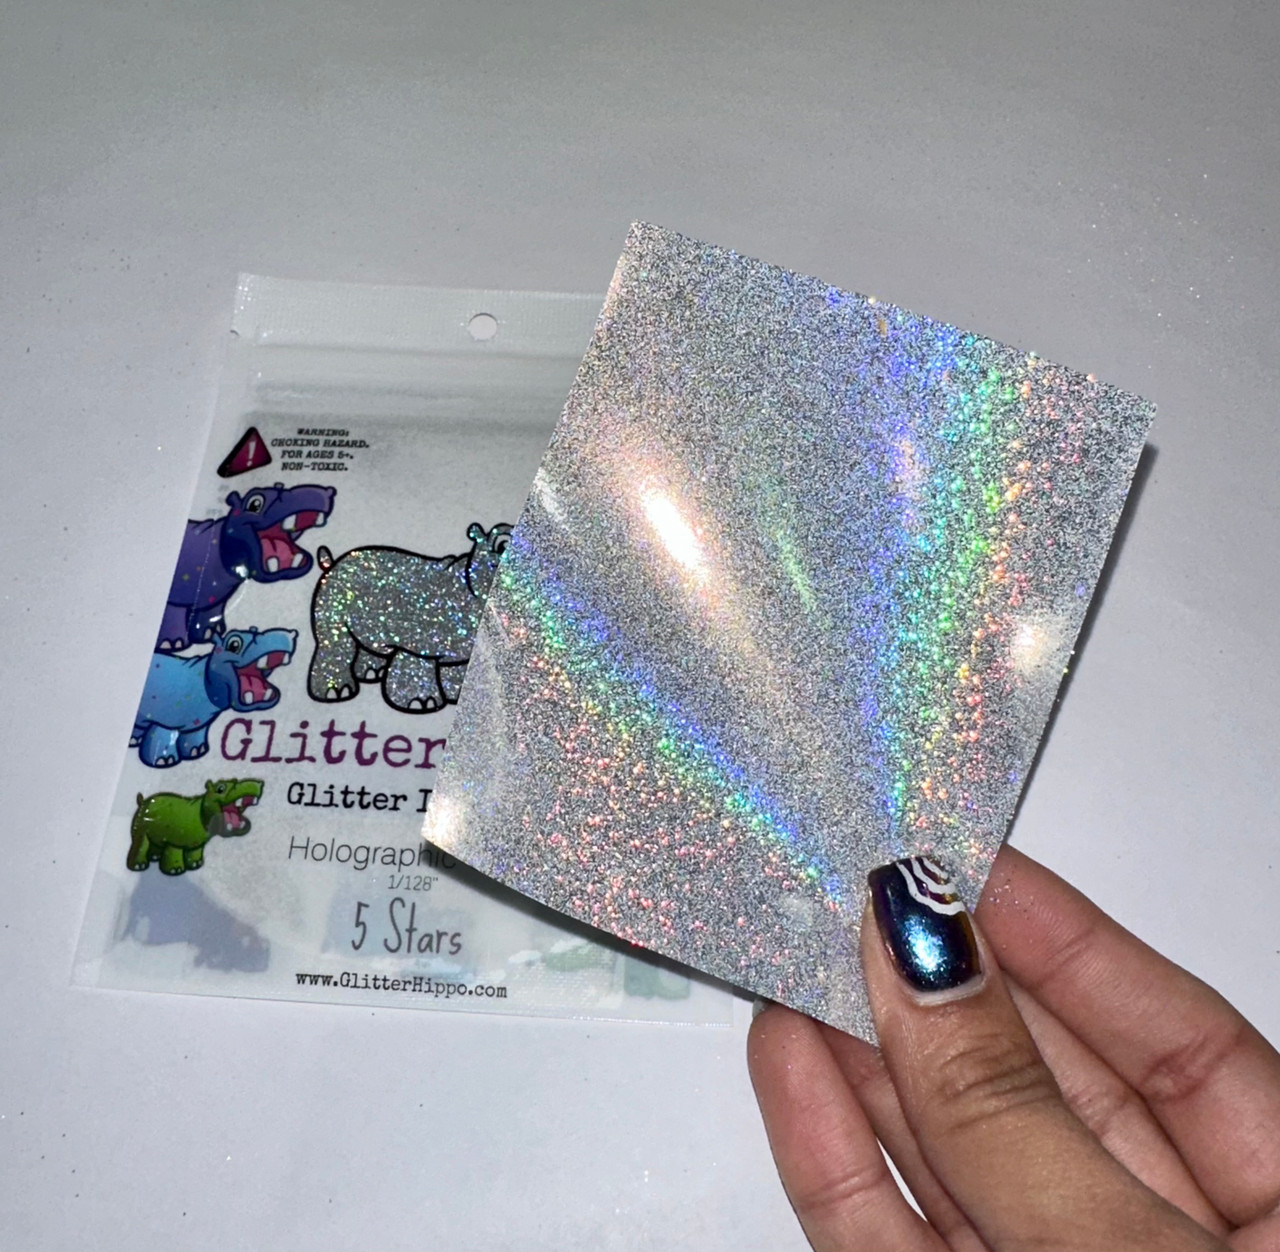 Hello Hobby Holographic Silver Glitter Shaker, Boys and Girls, Child, Ages 6+, Size: 3 oz